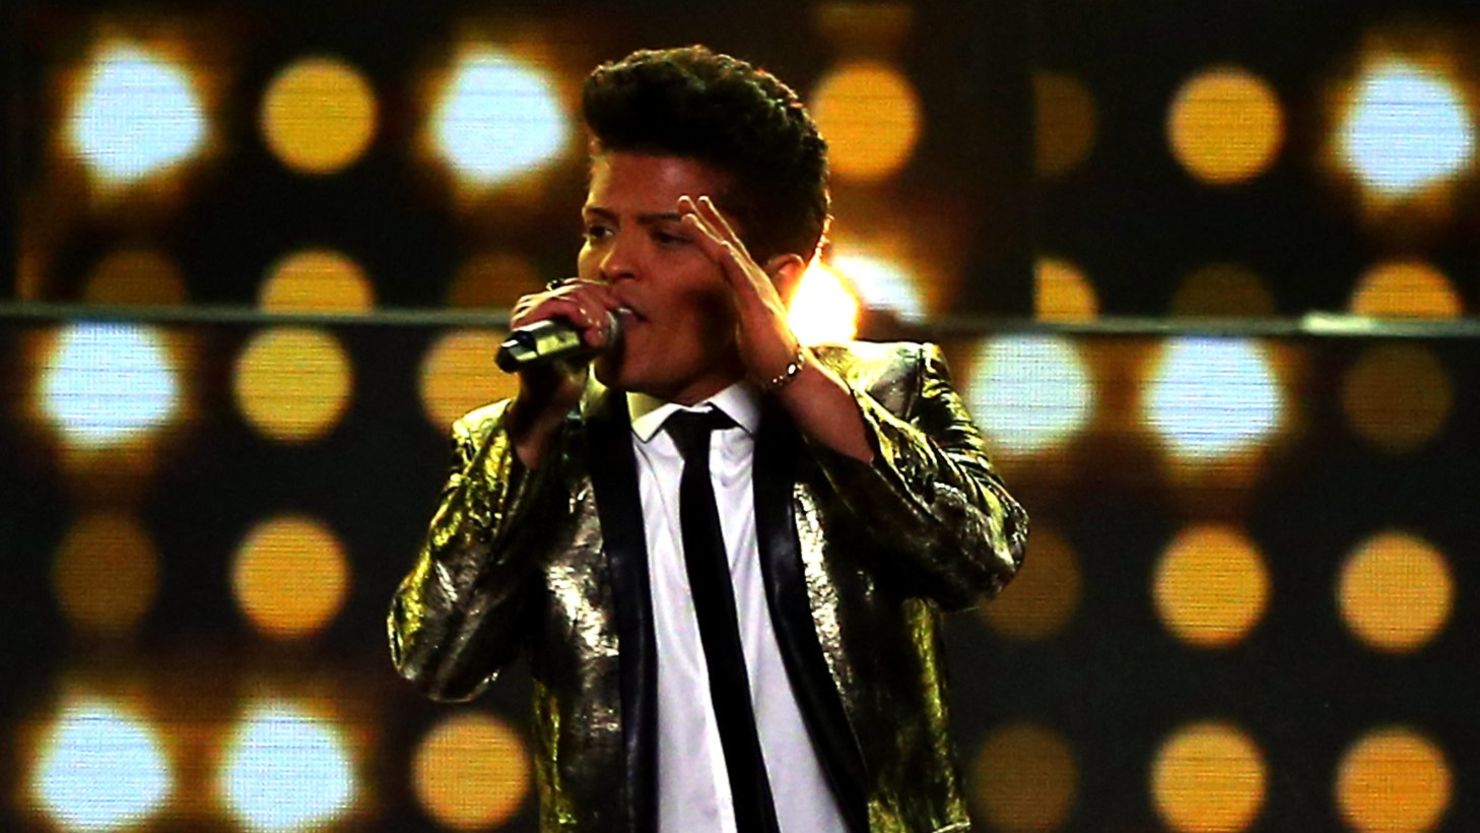 Musician Bruno Mars gave his stamp of approval to a high school's choreography to his hit, "Uptown Funk."